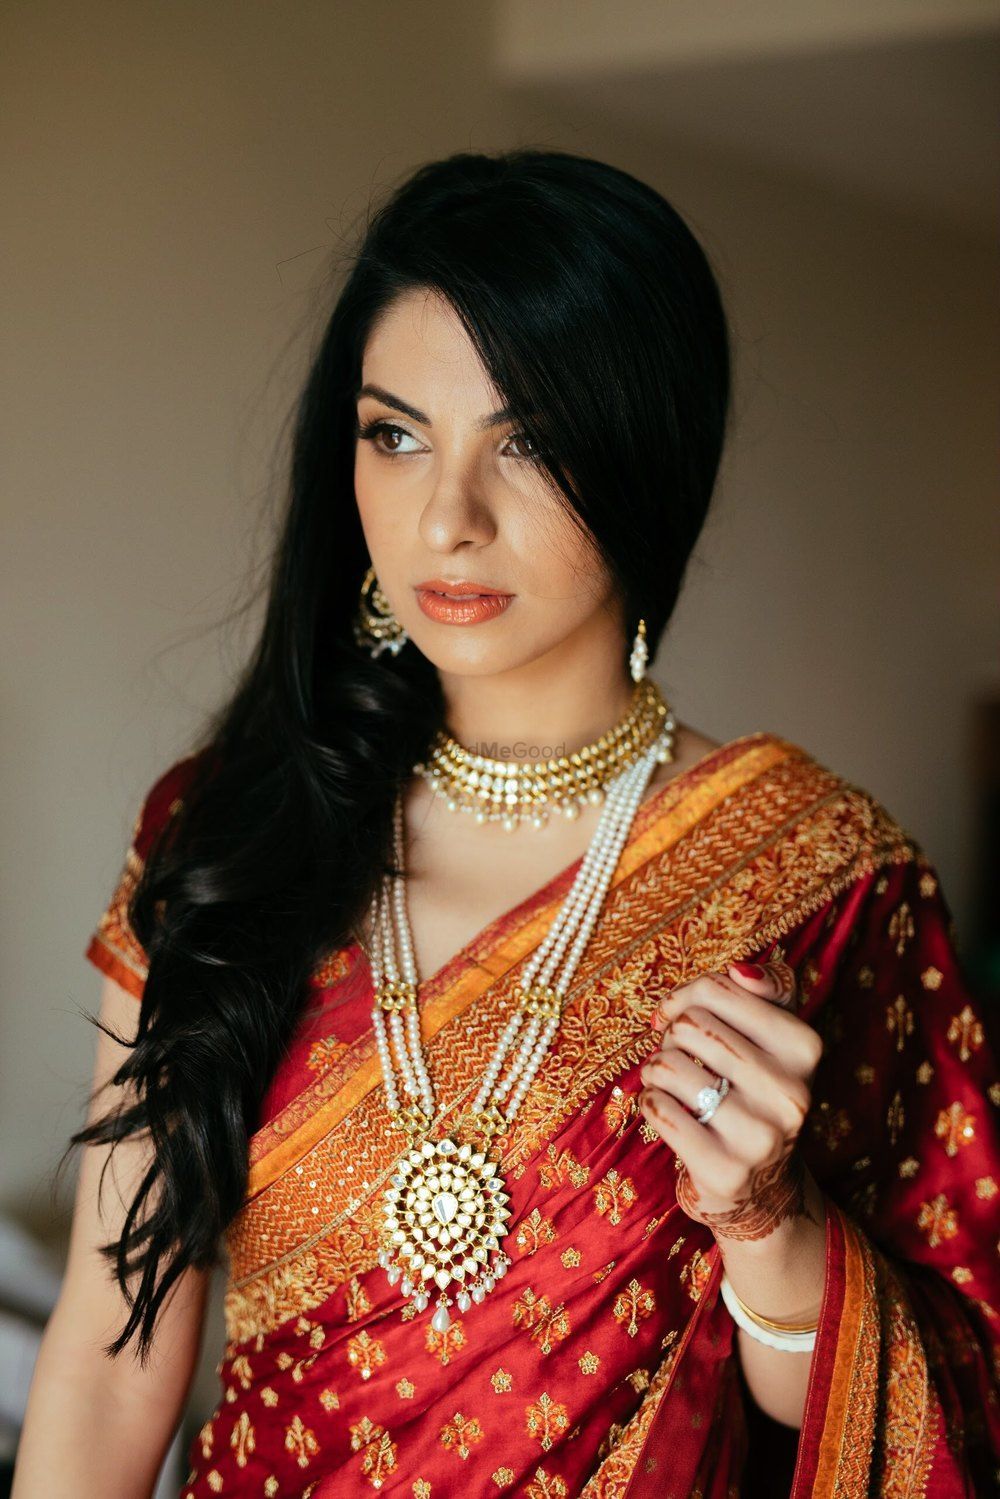 Photo of Pearl rani haar with layered necklaces